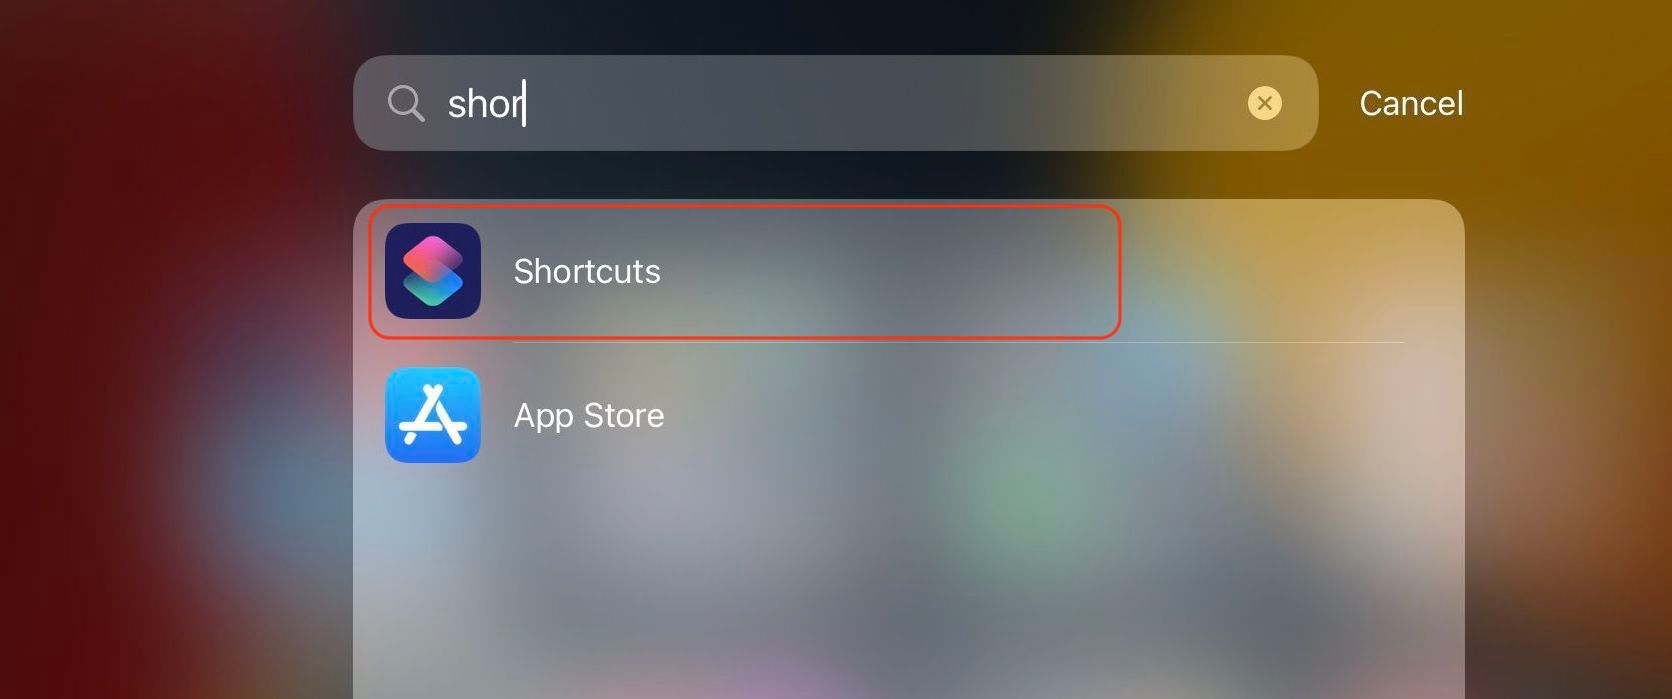 Shortcuts showing in spotlight search